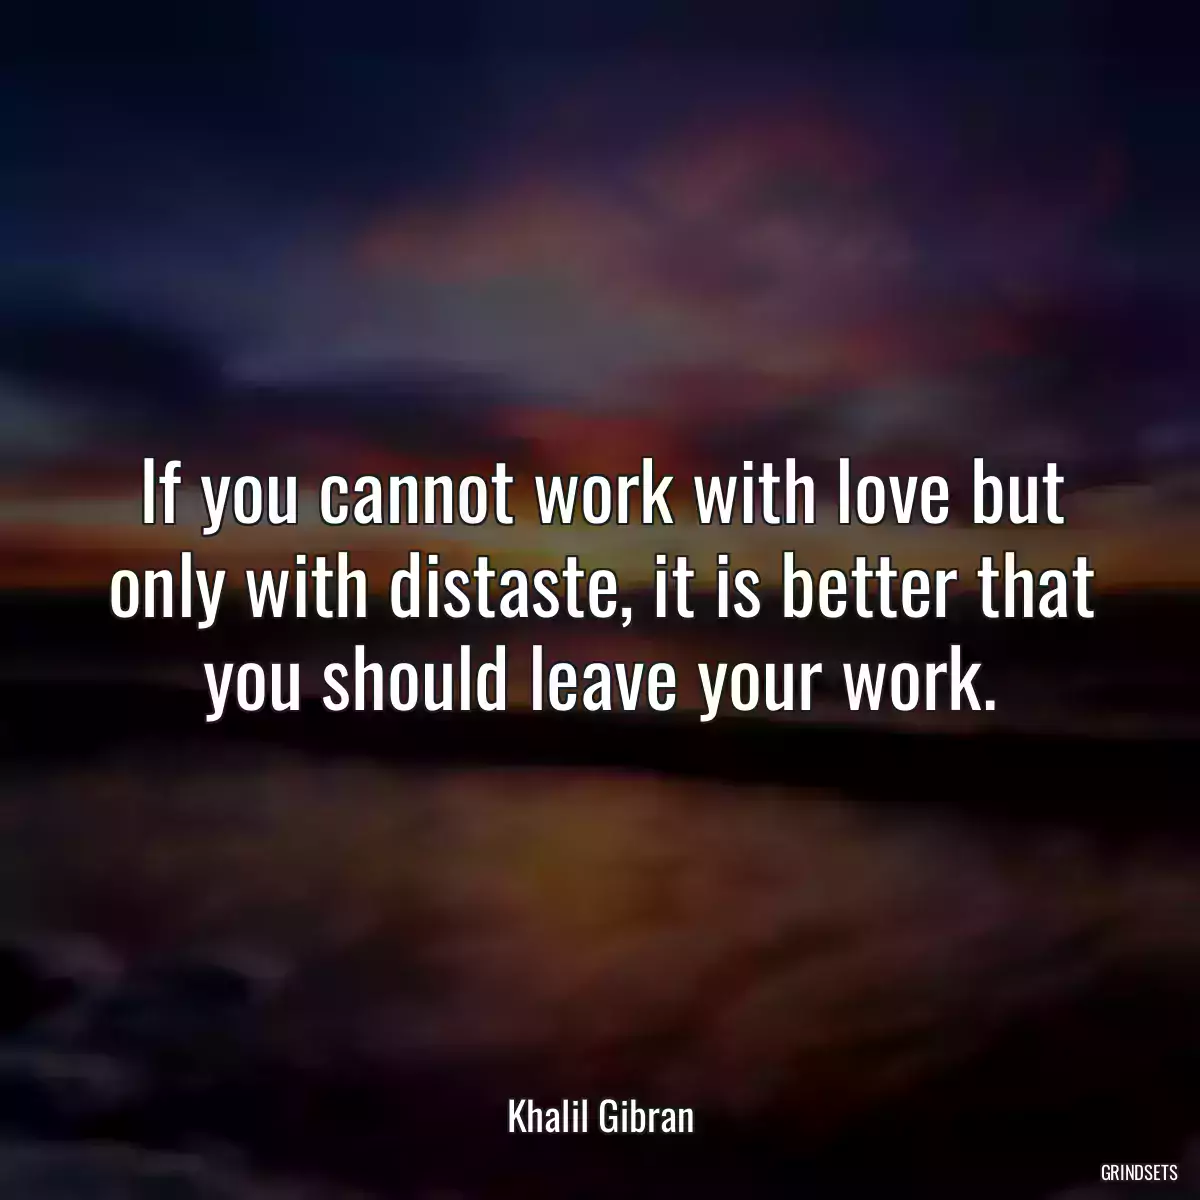 If you cannot work with love but only with distaste, it is better that you should leave your work.